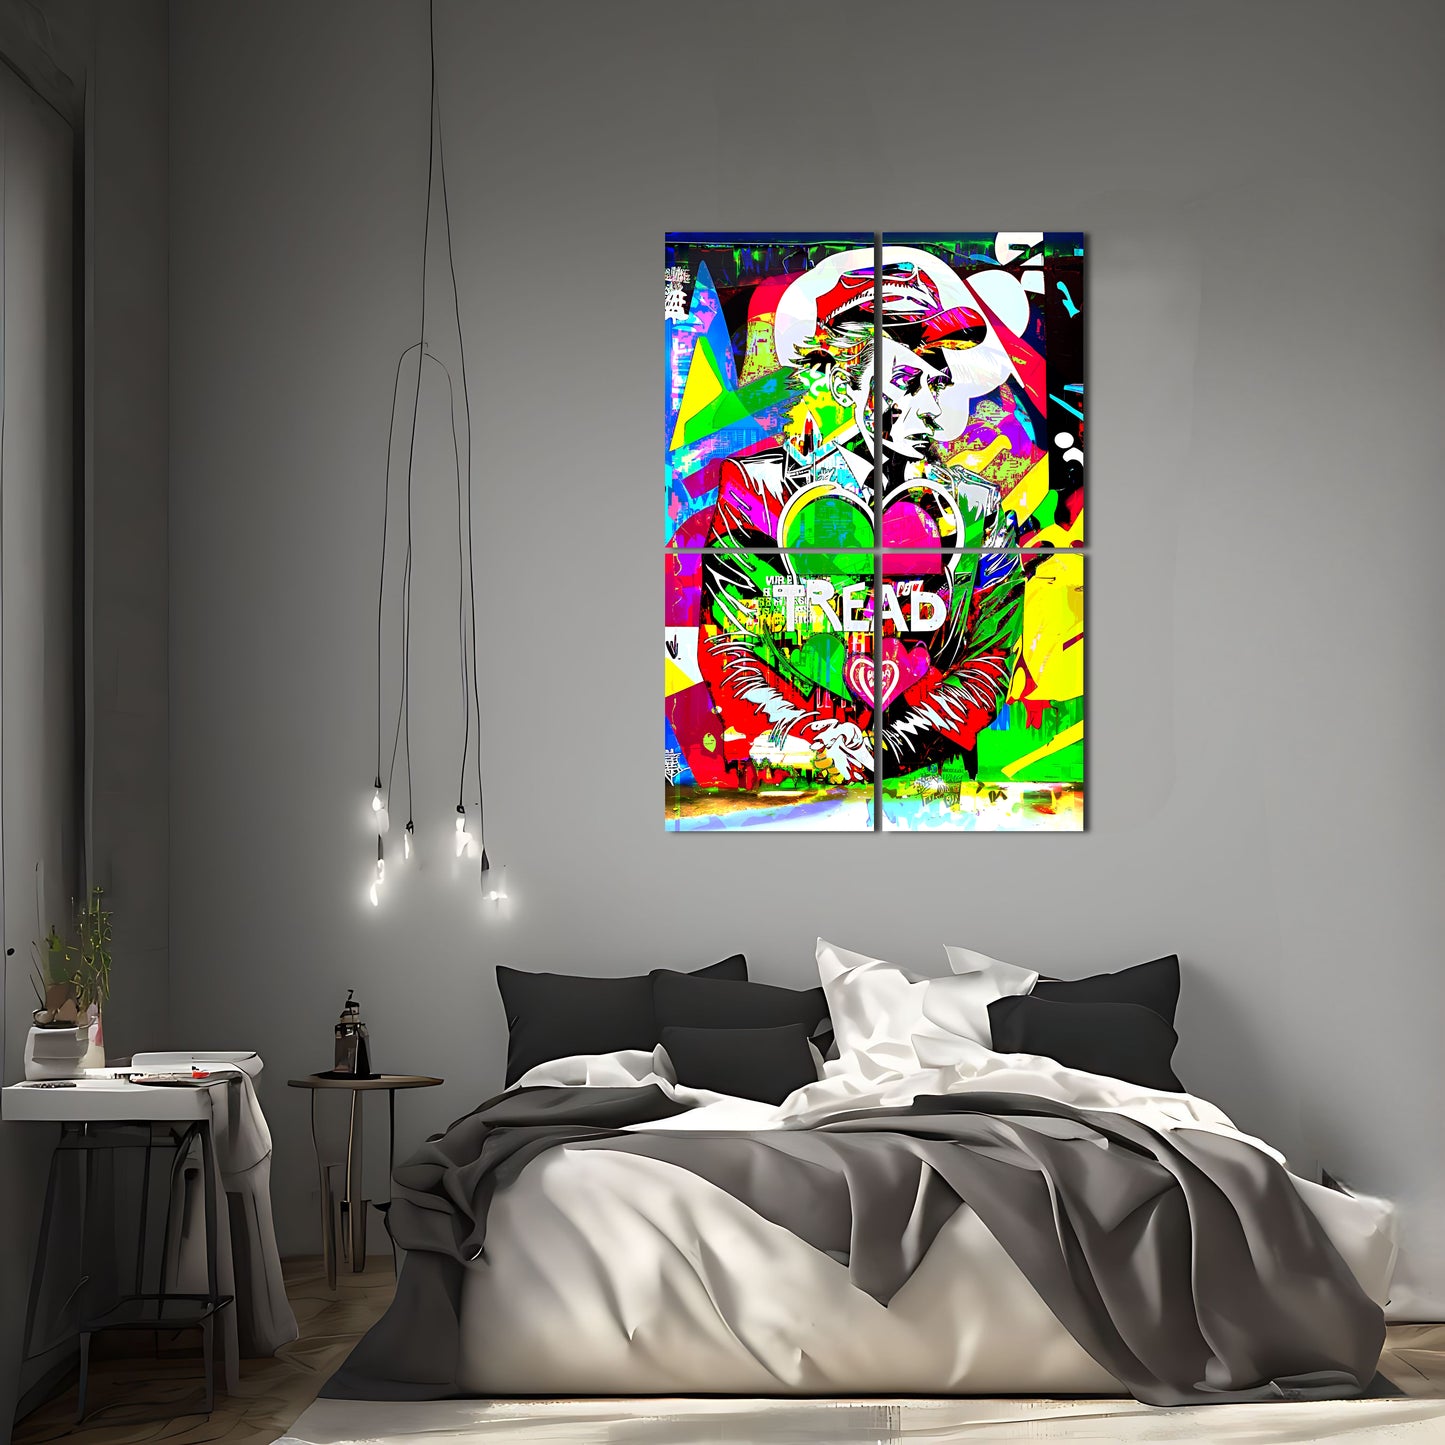 Hearts of Iron - Pop Art Painting of a Colorful Man in a Neon Suit